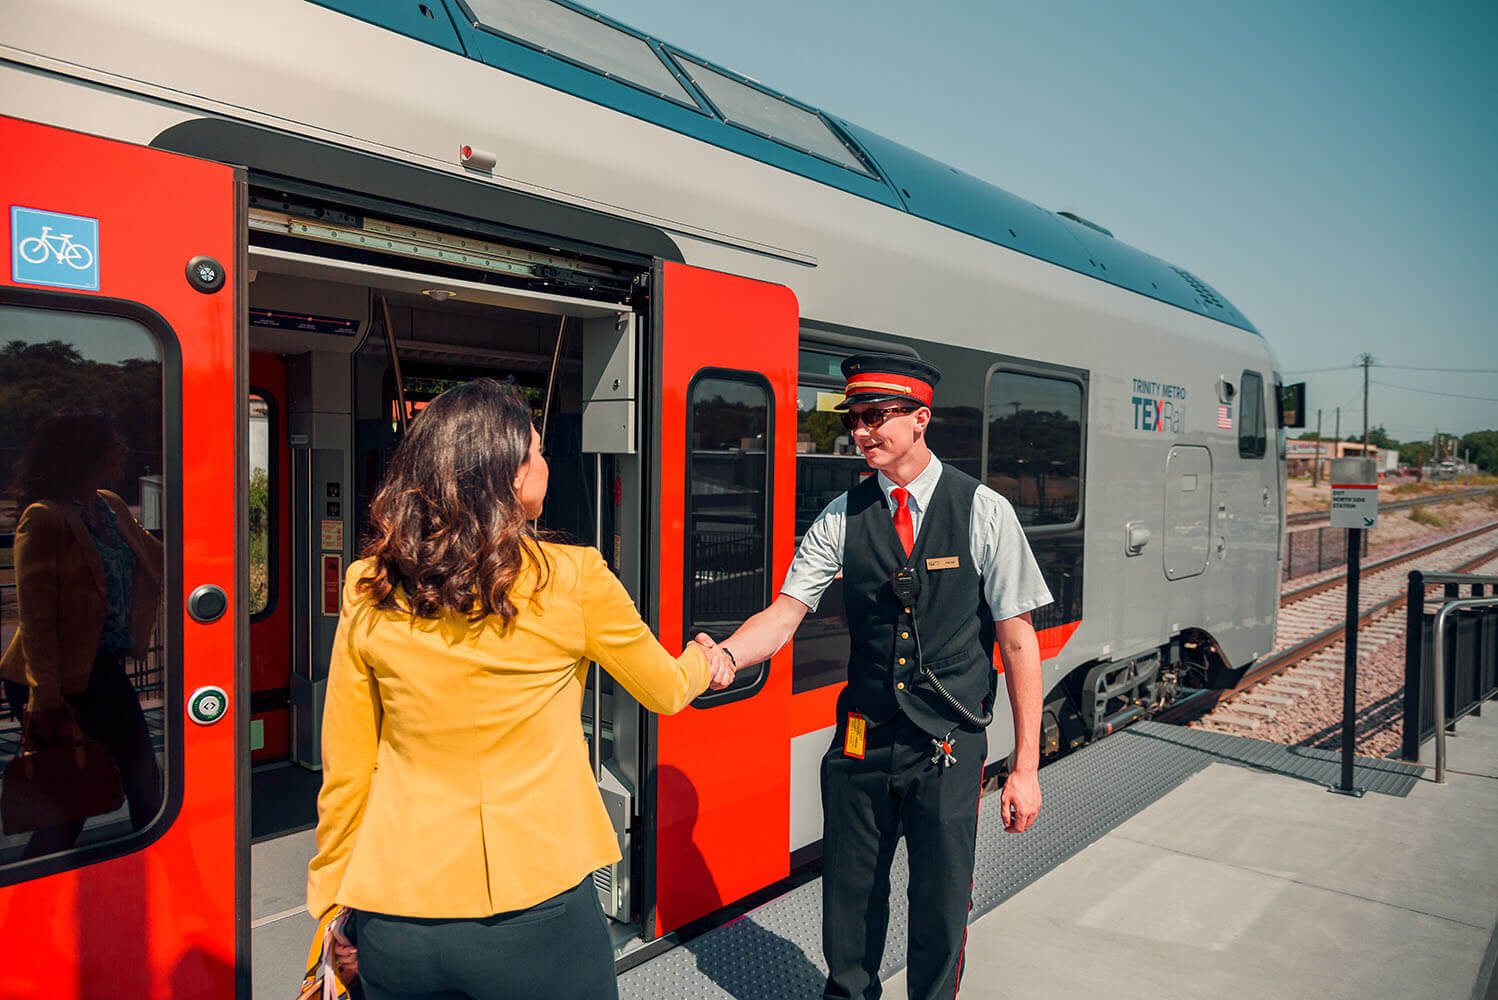 two people shaking hands before entering the train